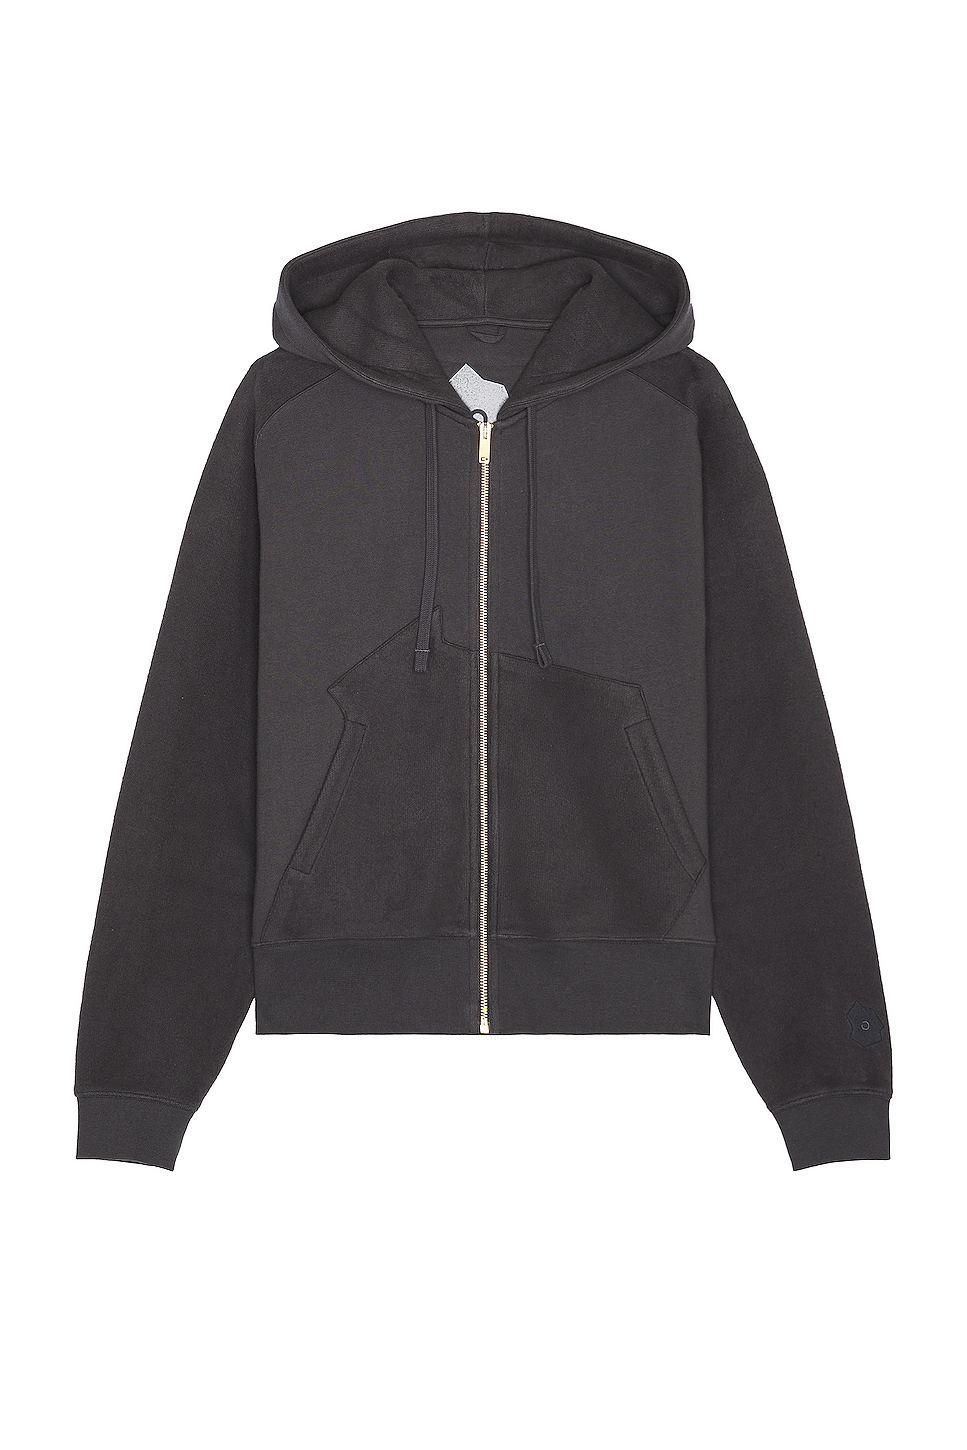 Image 1 of Objects IV Life Thought Bubble Paneled Hoodie in Anthracite Grey